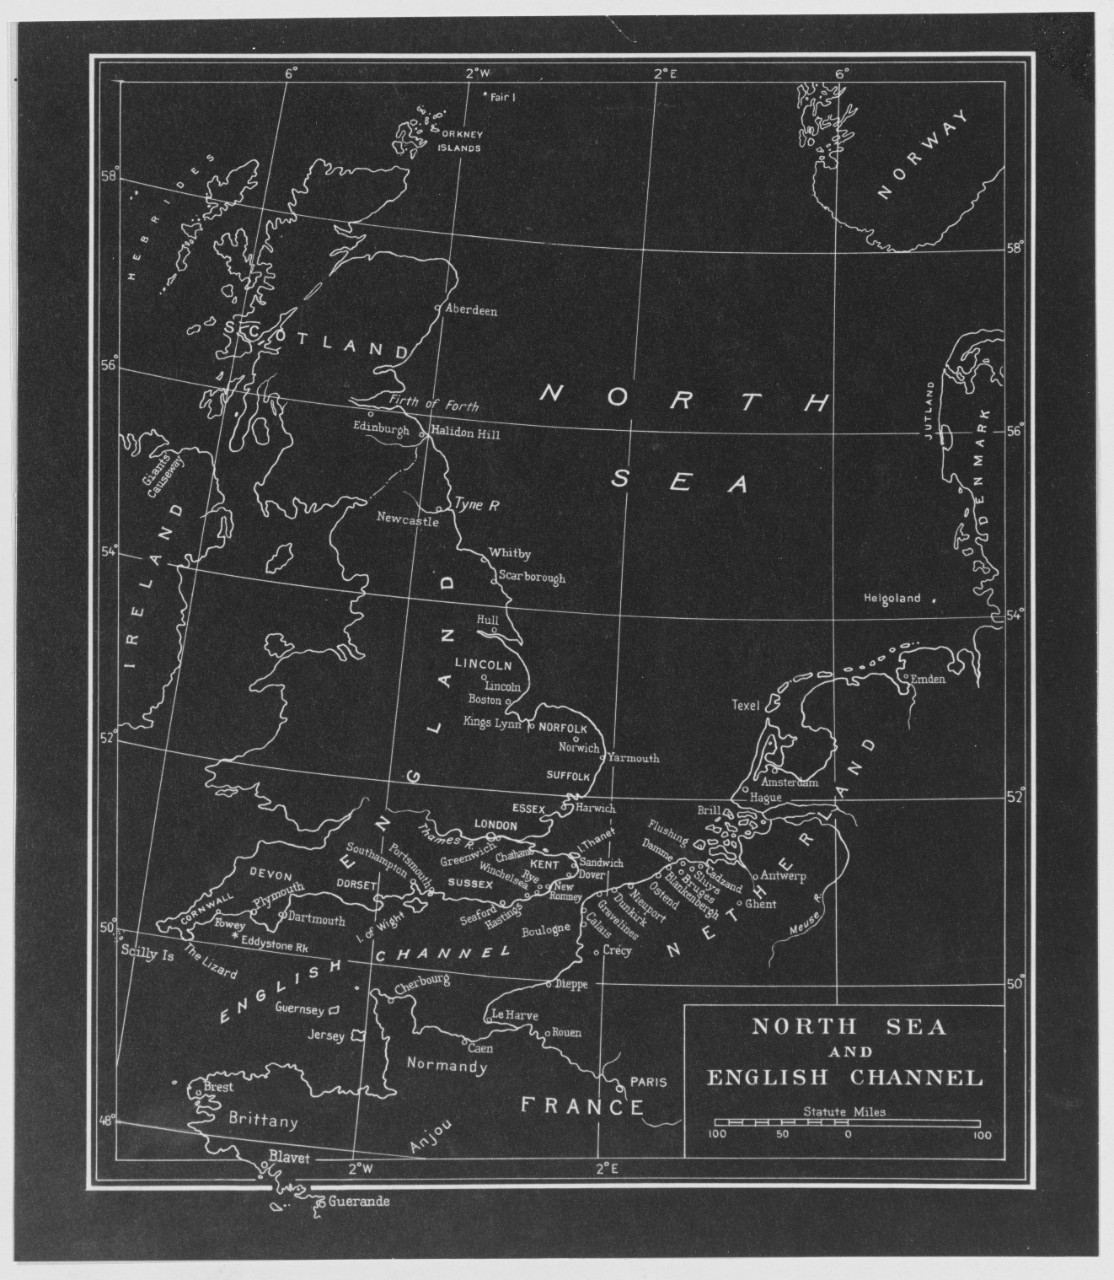 North Sea and English Channel Map